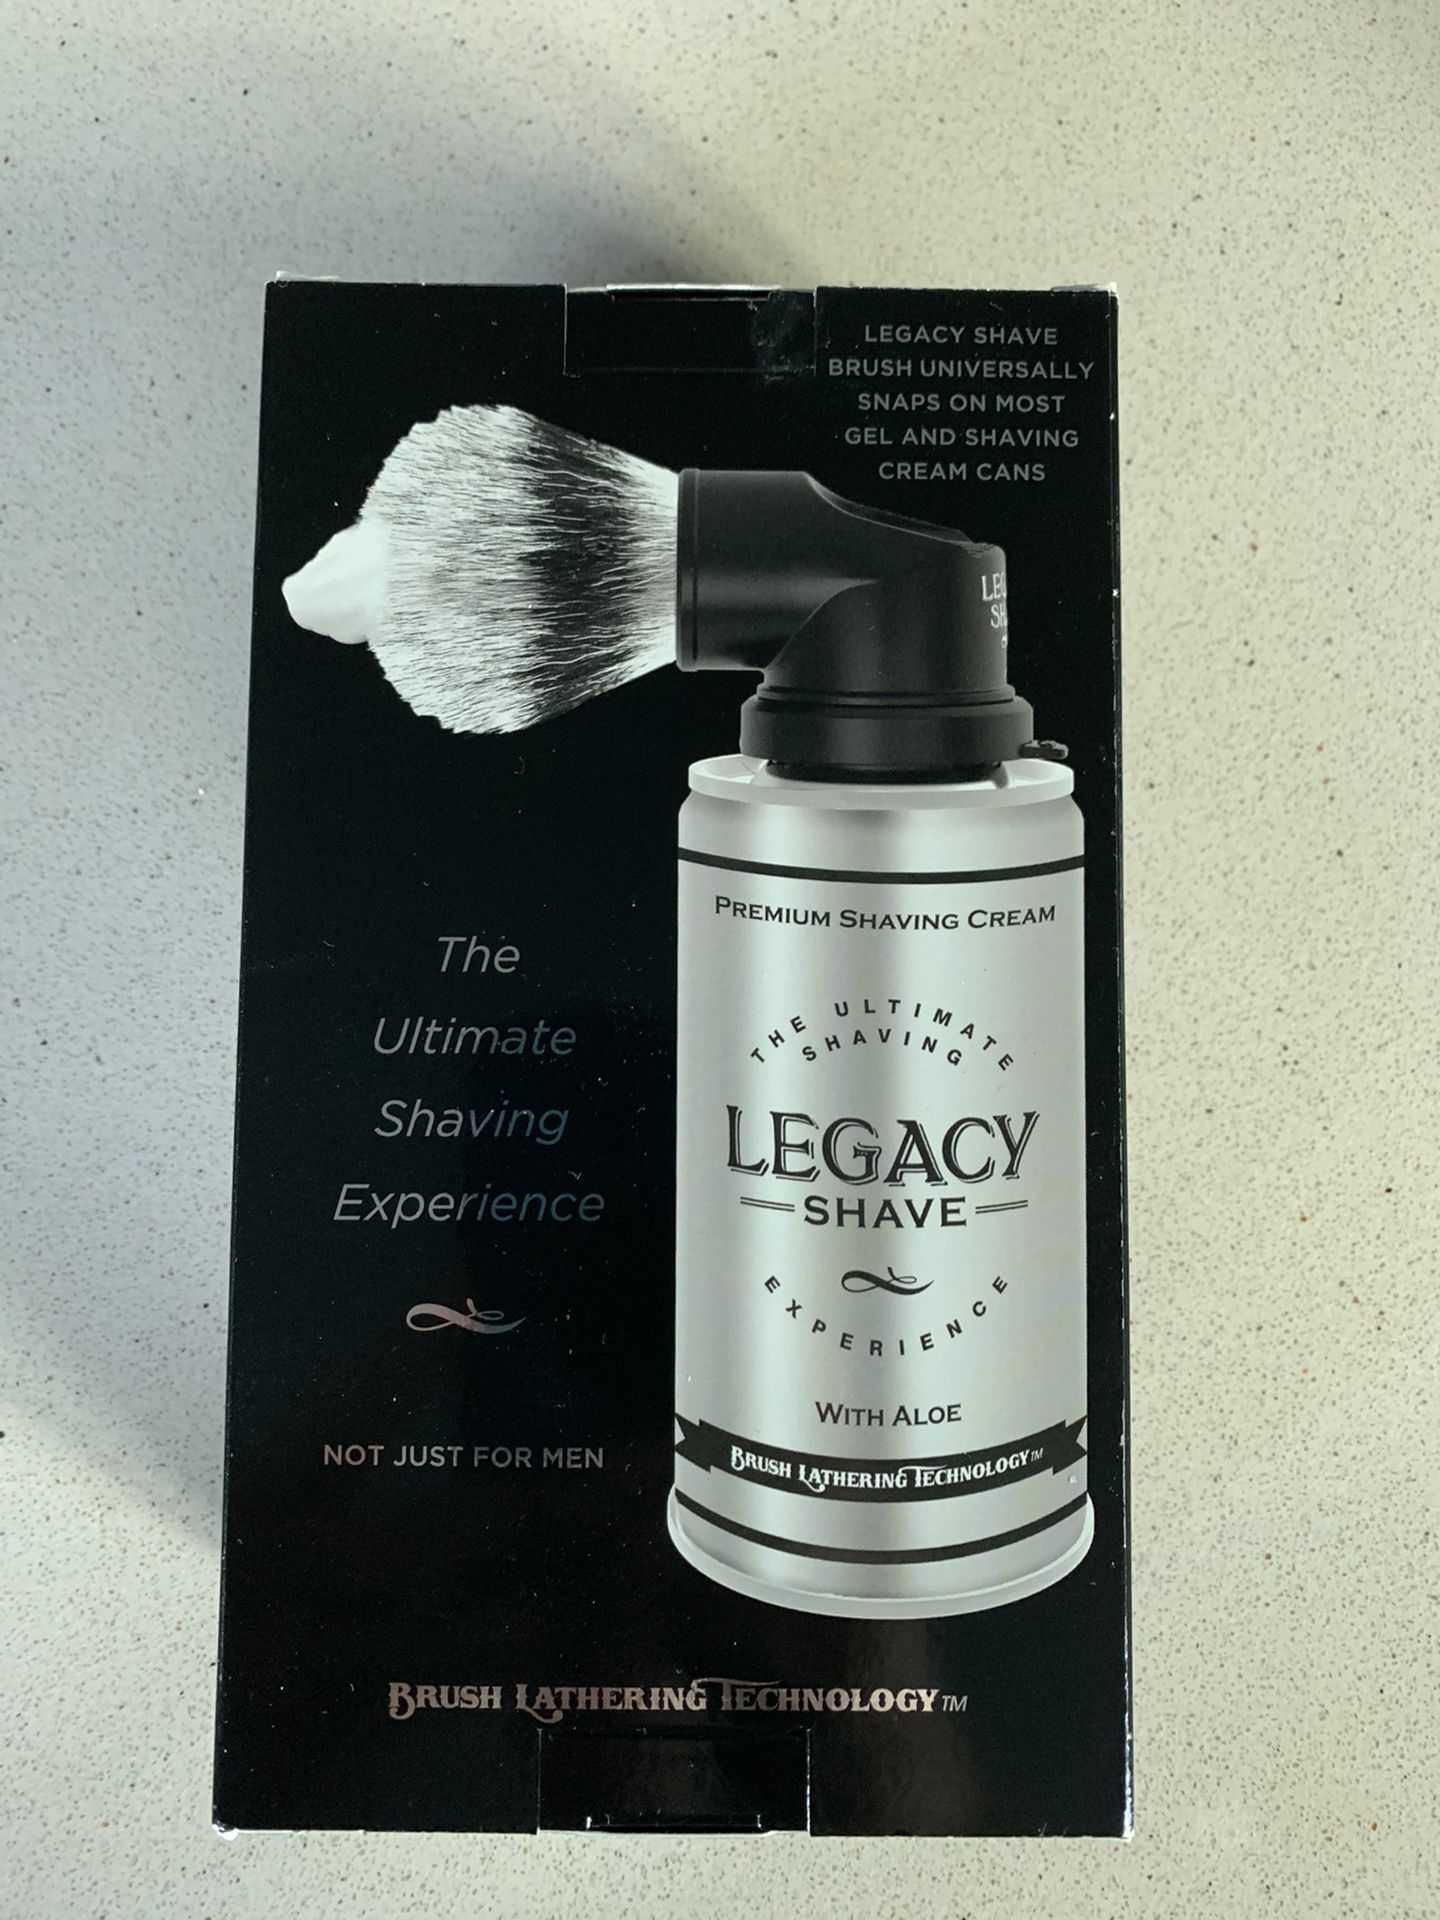 Shaving Cream With Brush 2 in 1 - Pick Up From Brickell (33131)